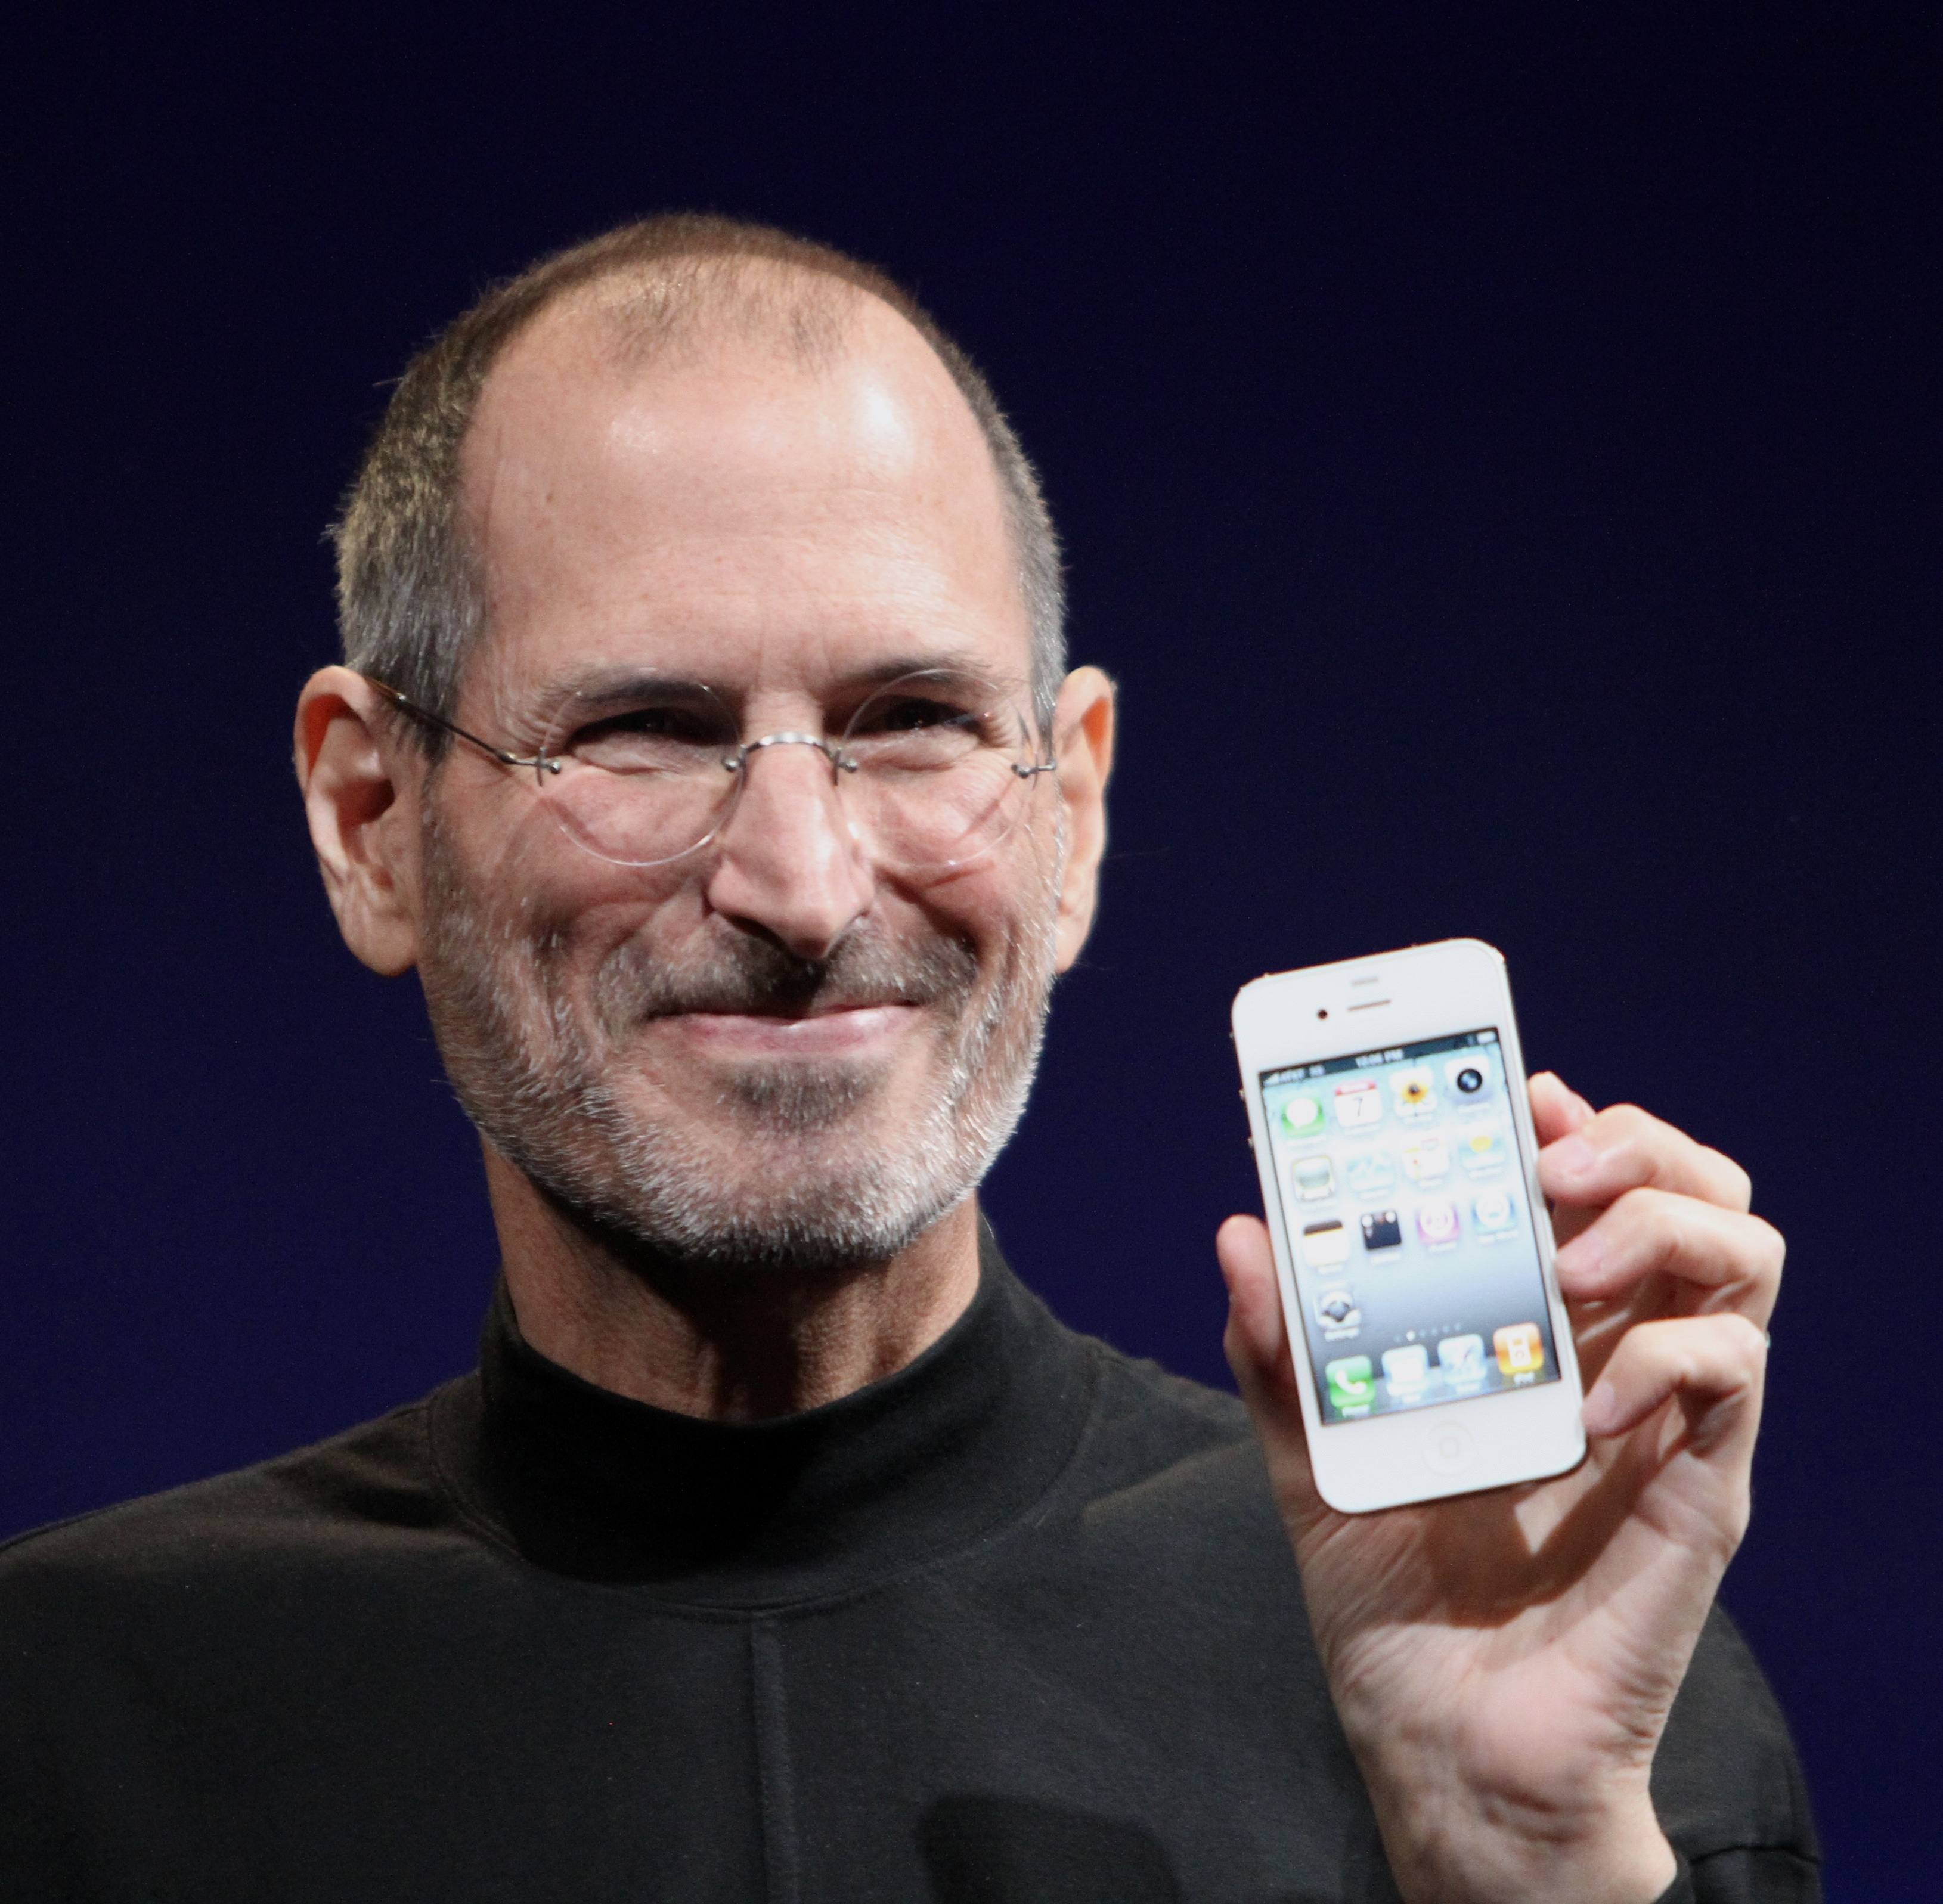 This Is How Steve Jobs Started and Changed the World